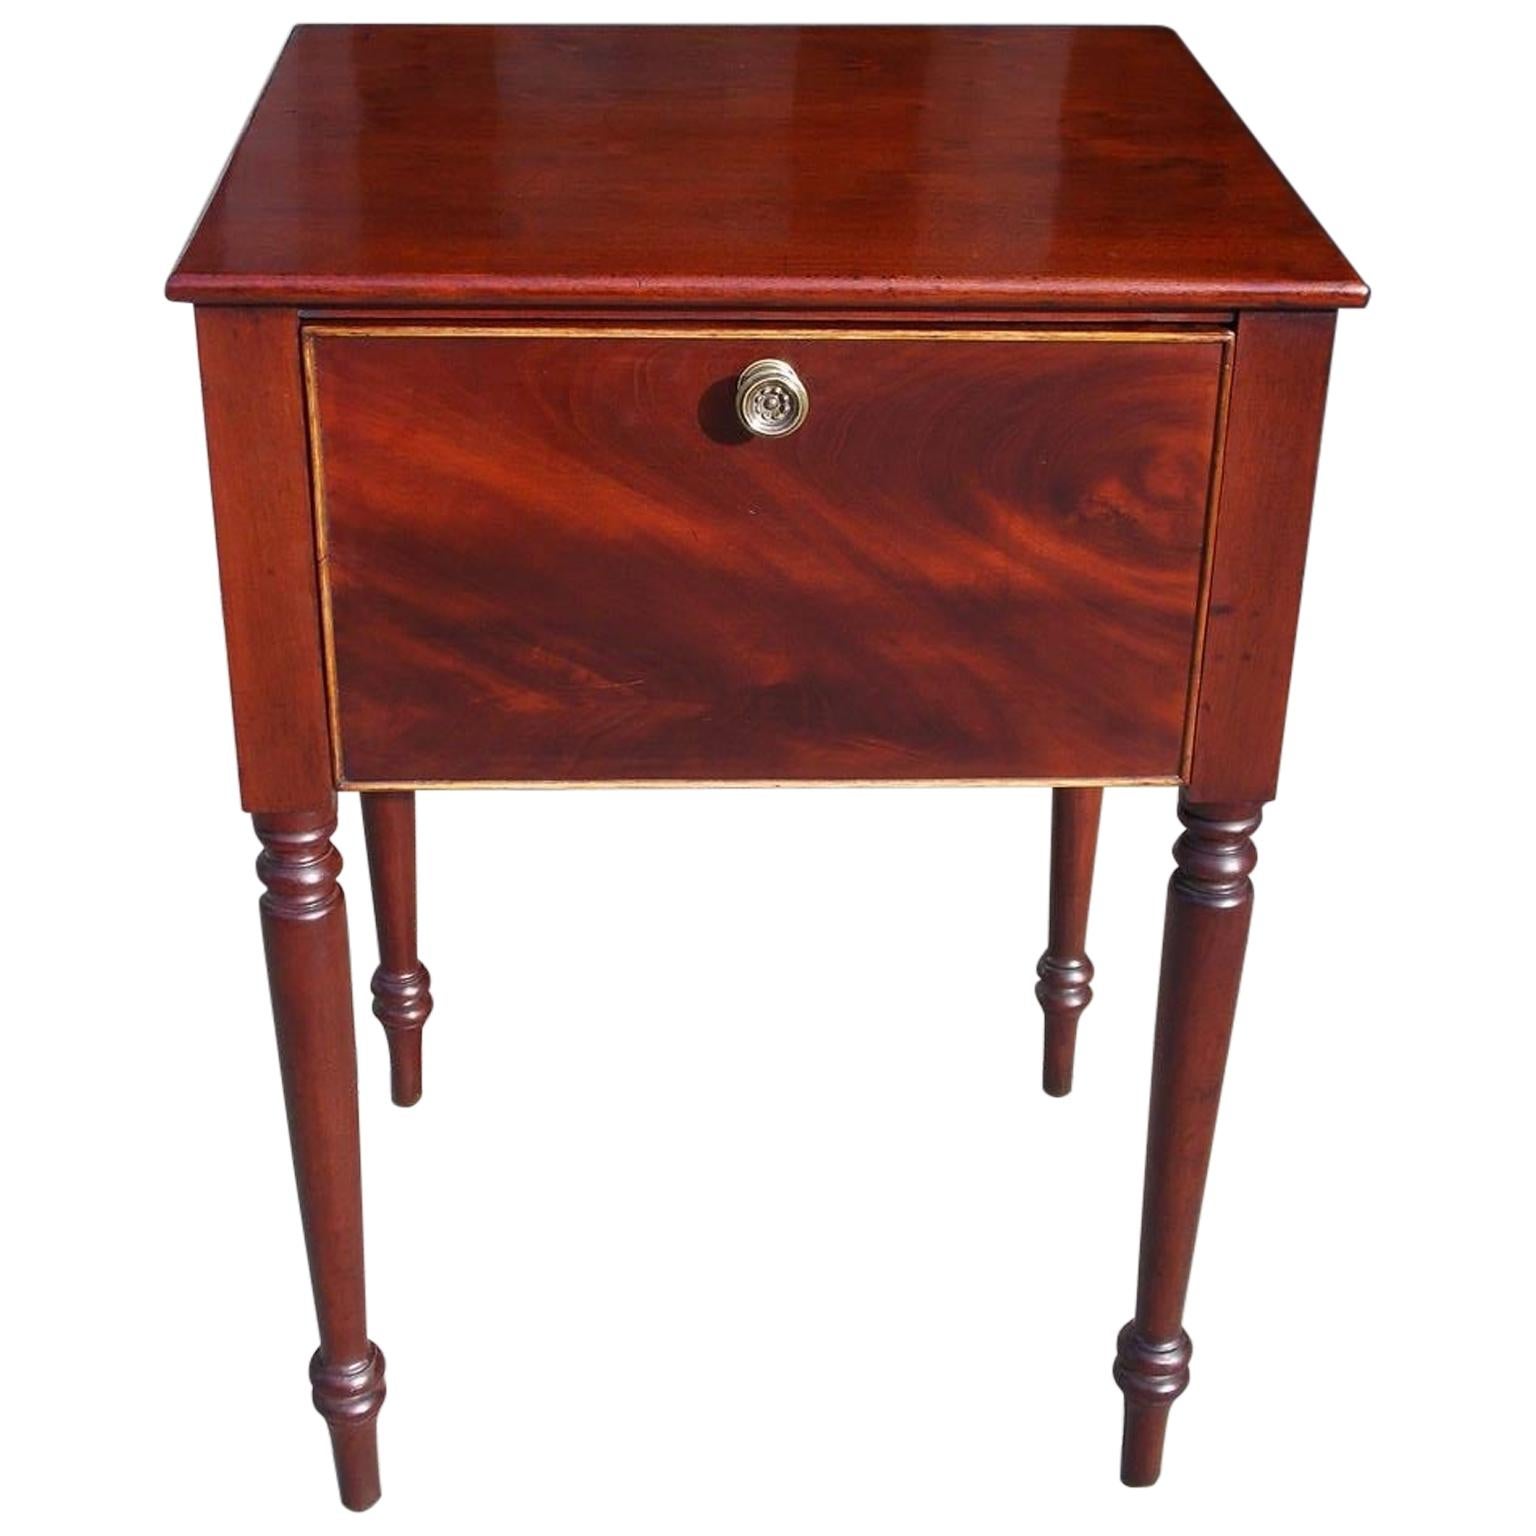 American Sheraton Mahogany Hinged Side Table with Turned Bulbous Legs, C. 1820 For Sale